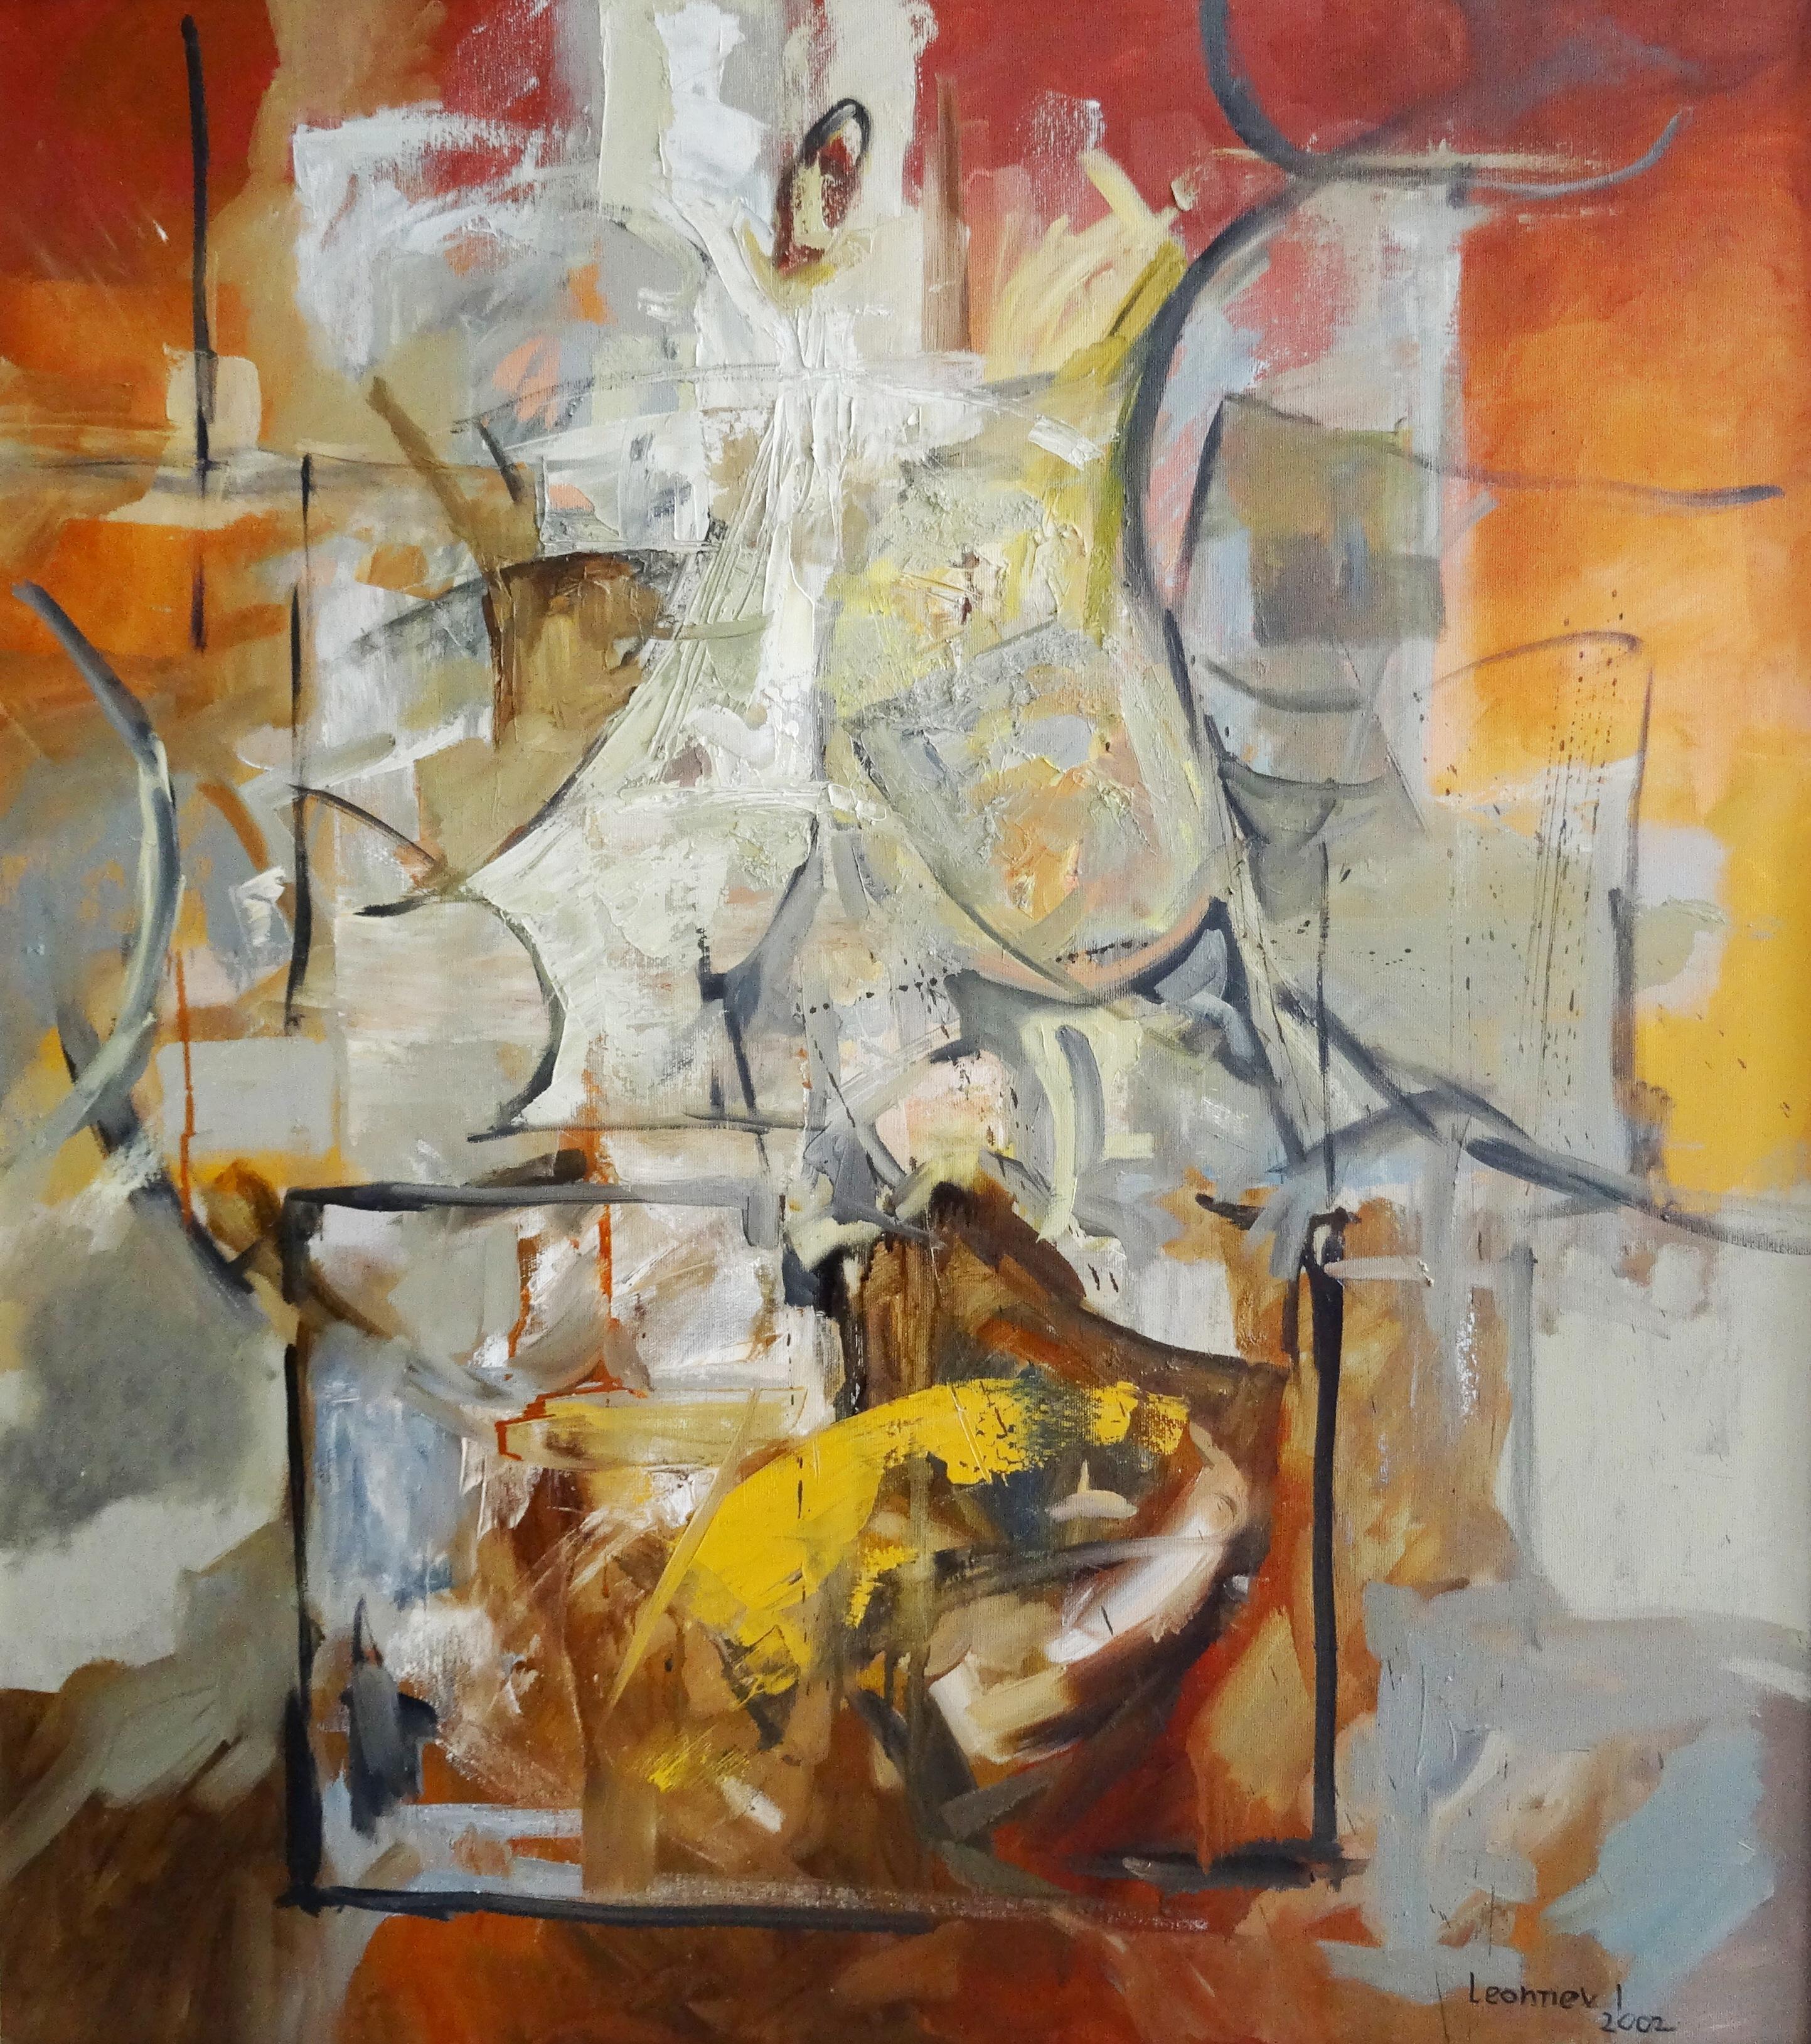 Igor Leontiev Abstract Painting -   Nude Majo. 2002, oil on canvas, 90x80 cm